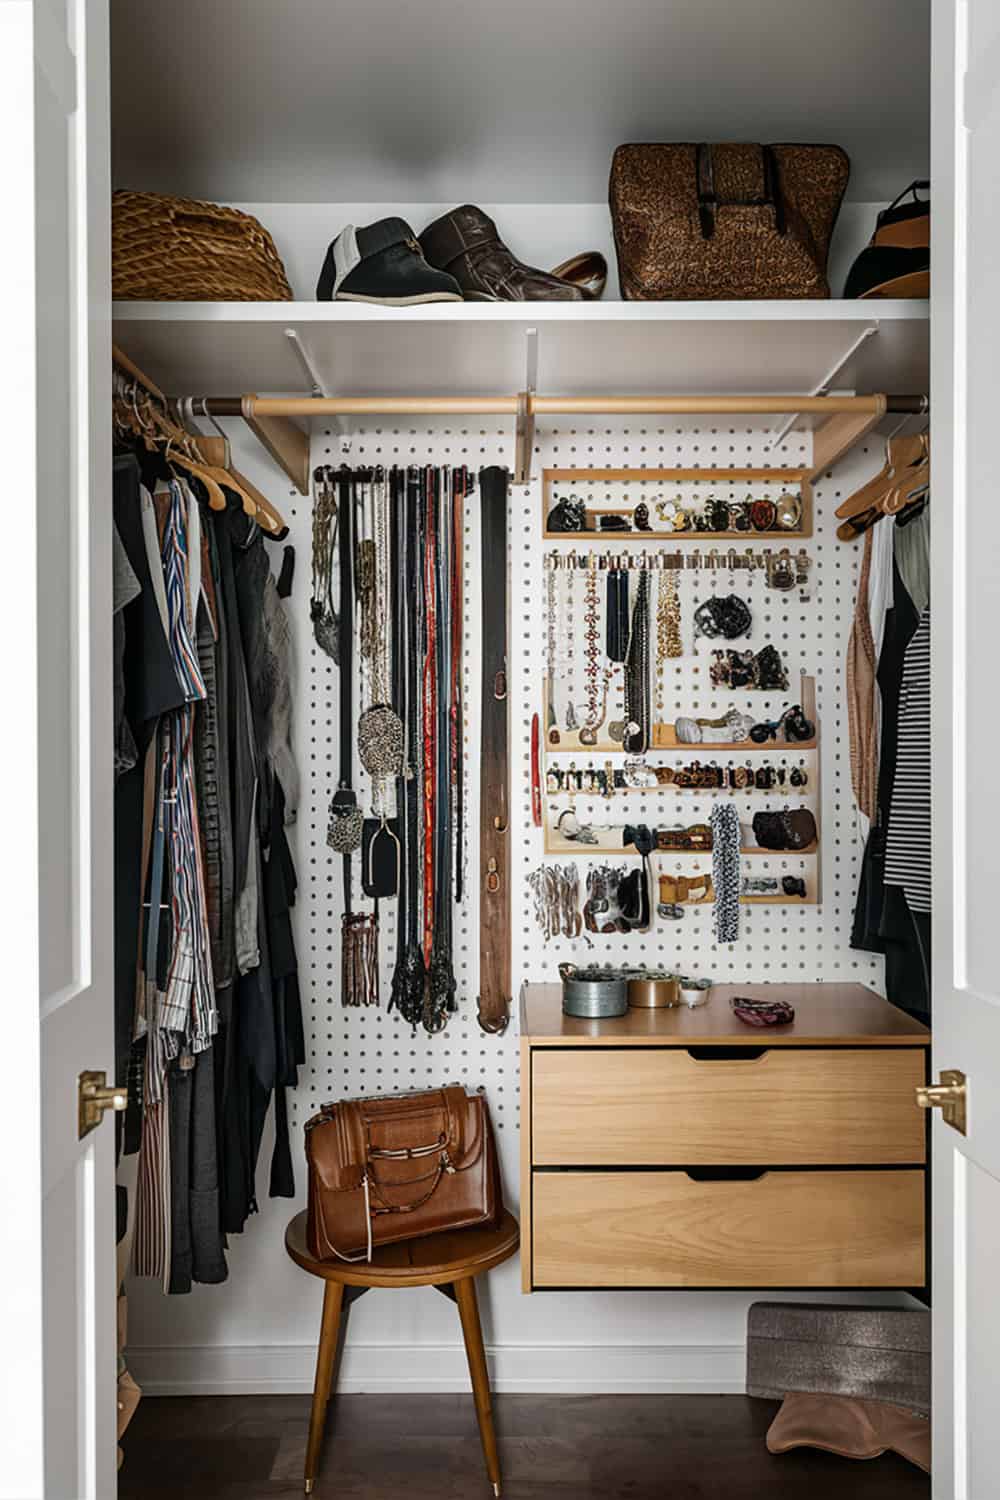 Hang a Pegboard for Accessories